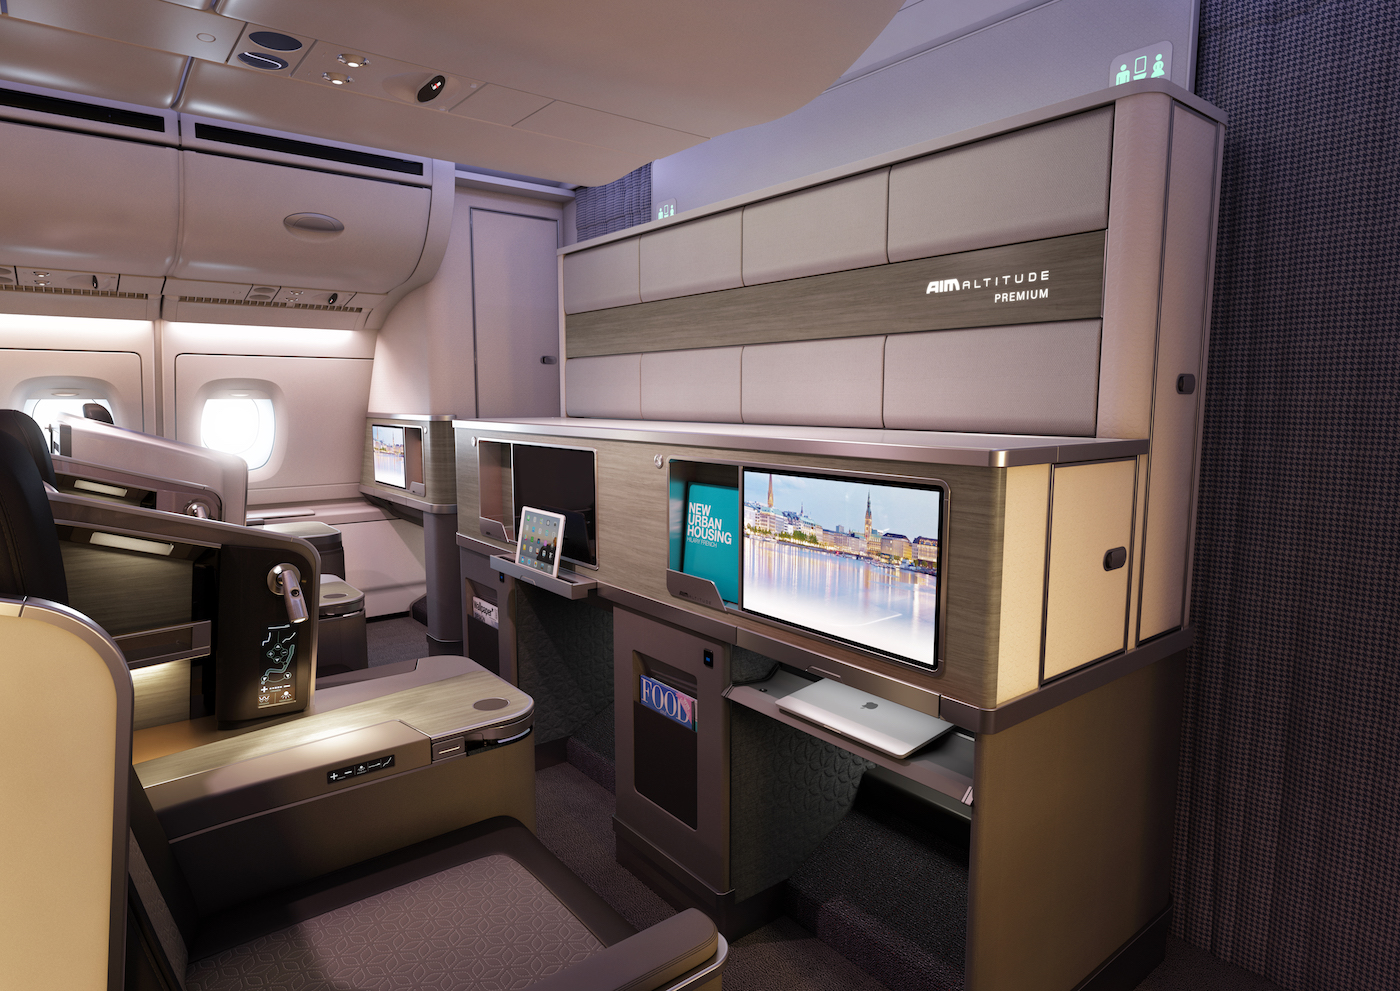 AIM Altitude has created concept front-row monuments (FRMs) for aircraft interiors